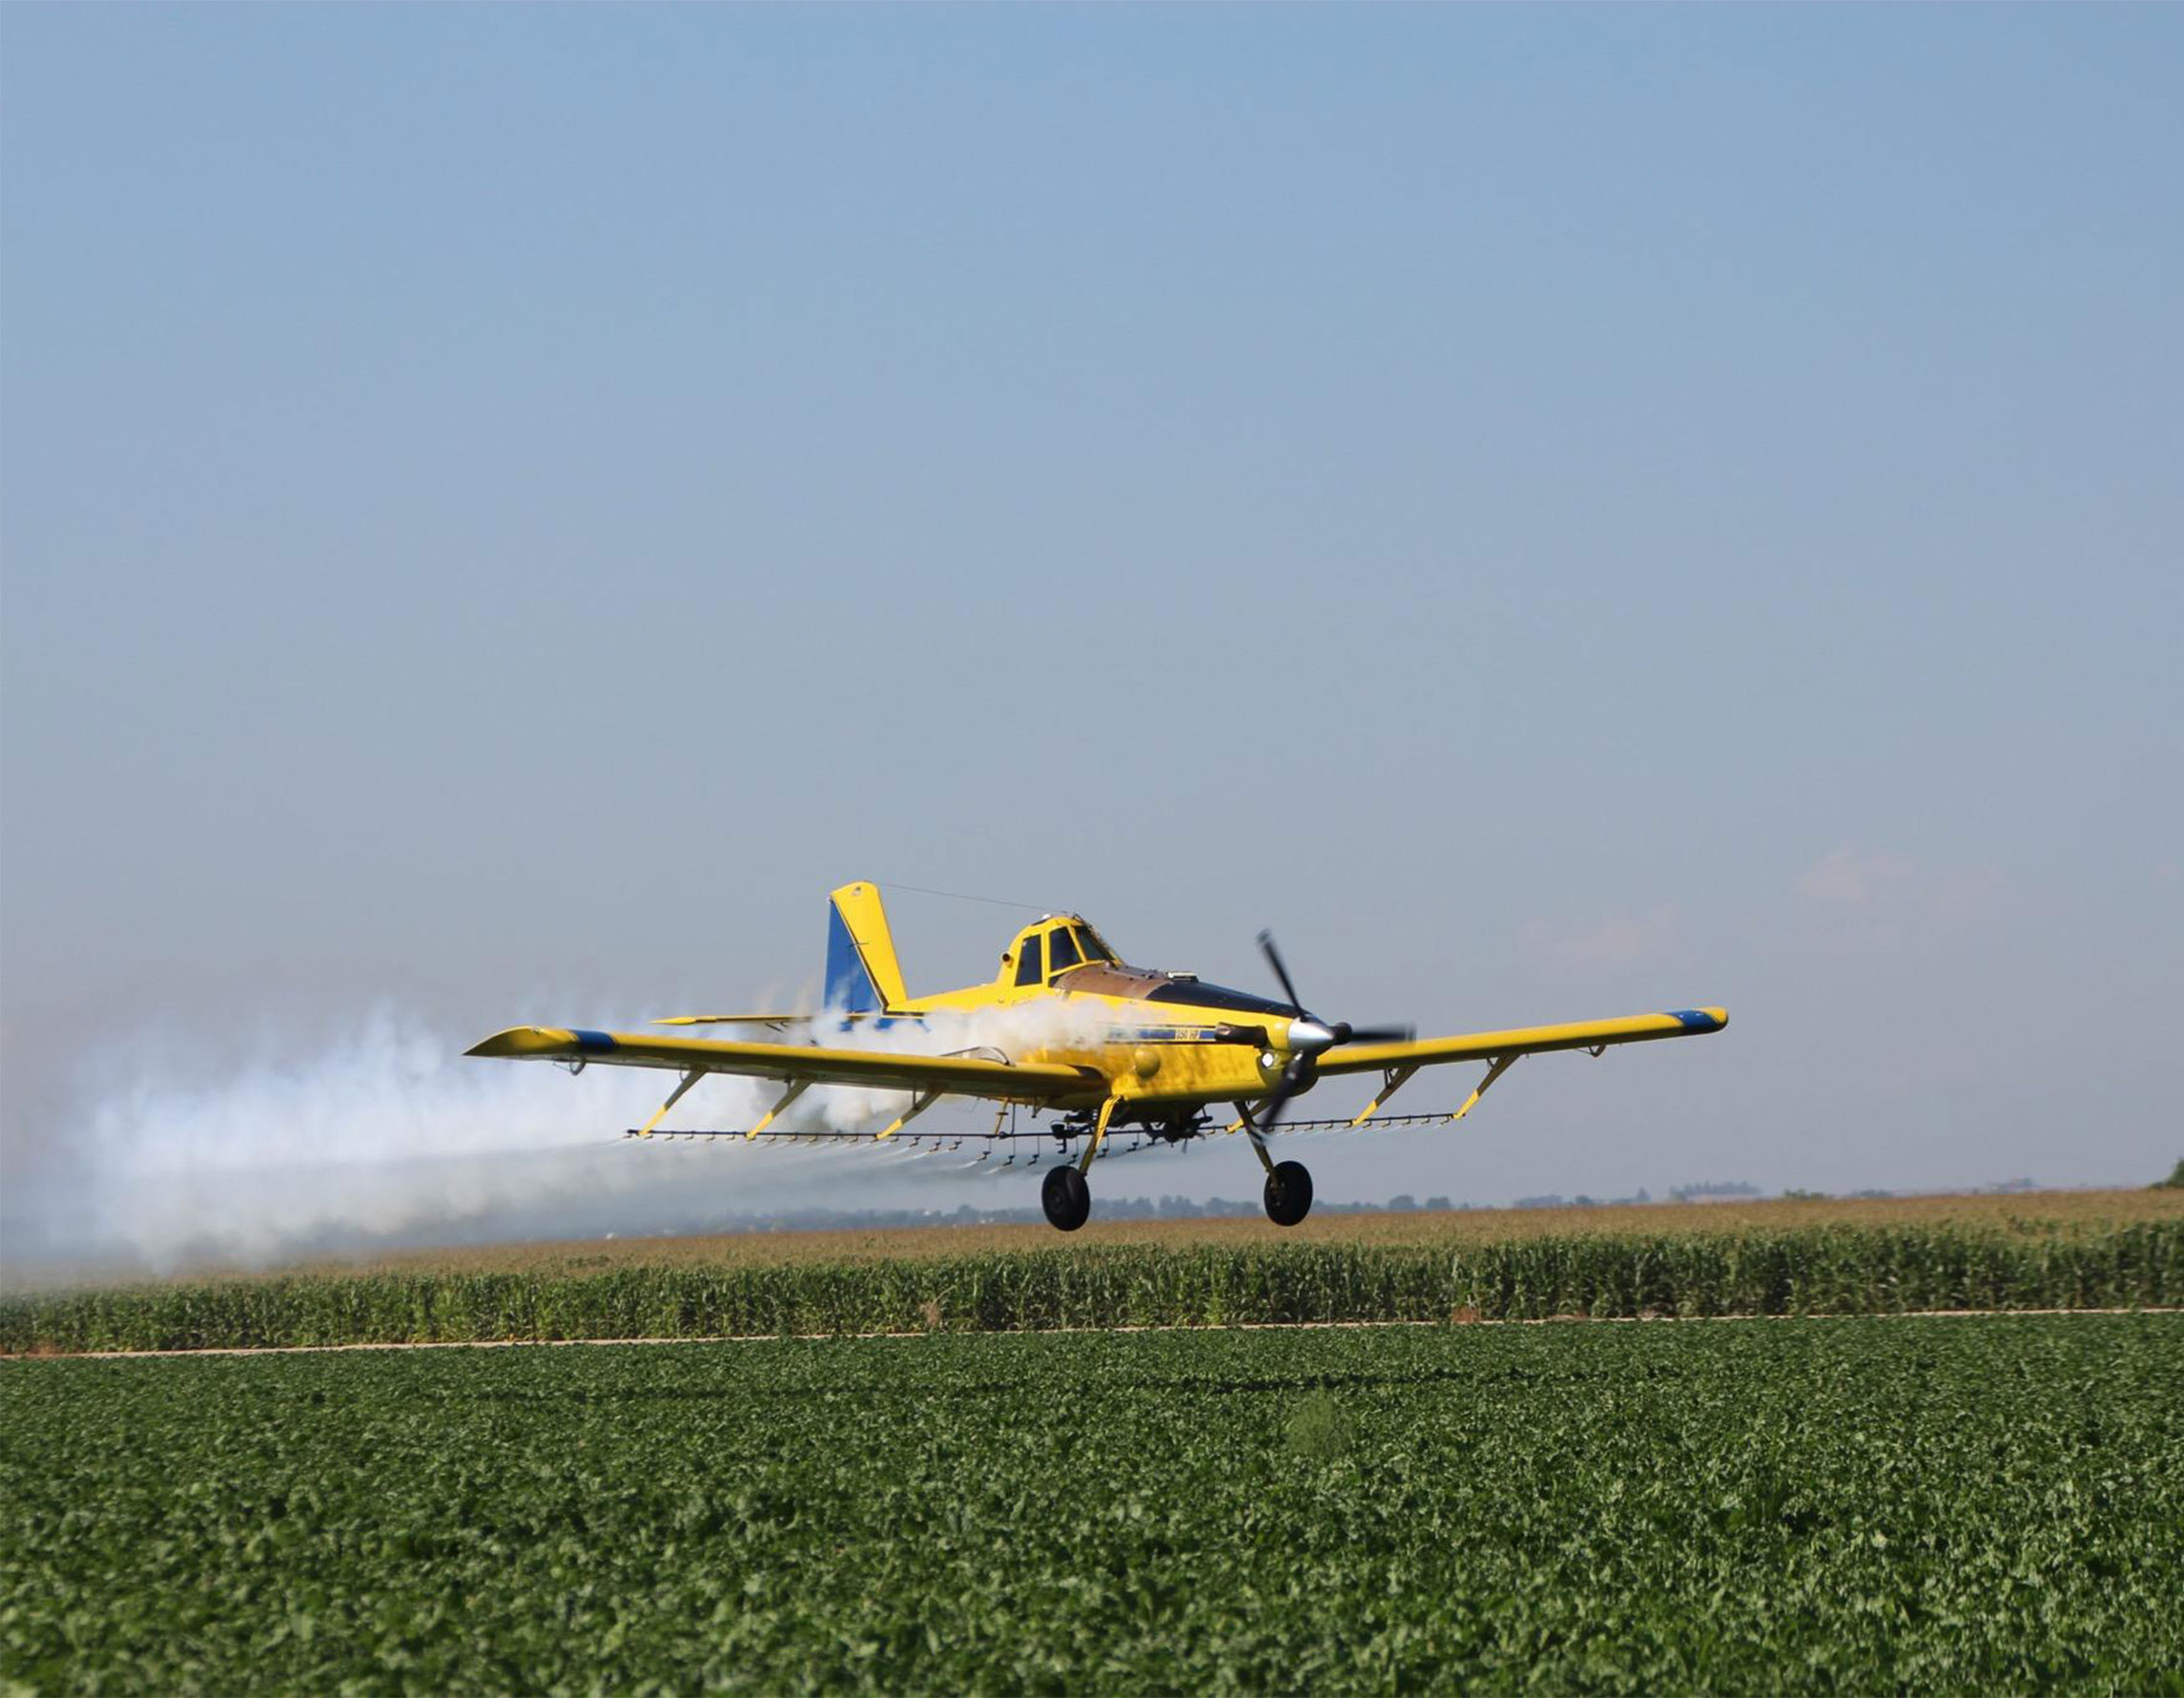 Agricultural aircraft flying low over crops